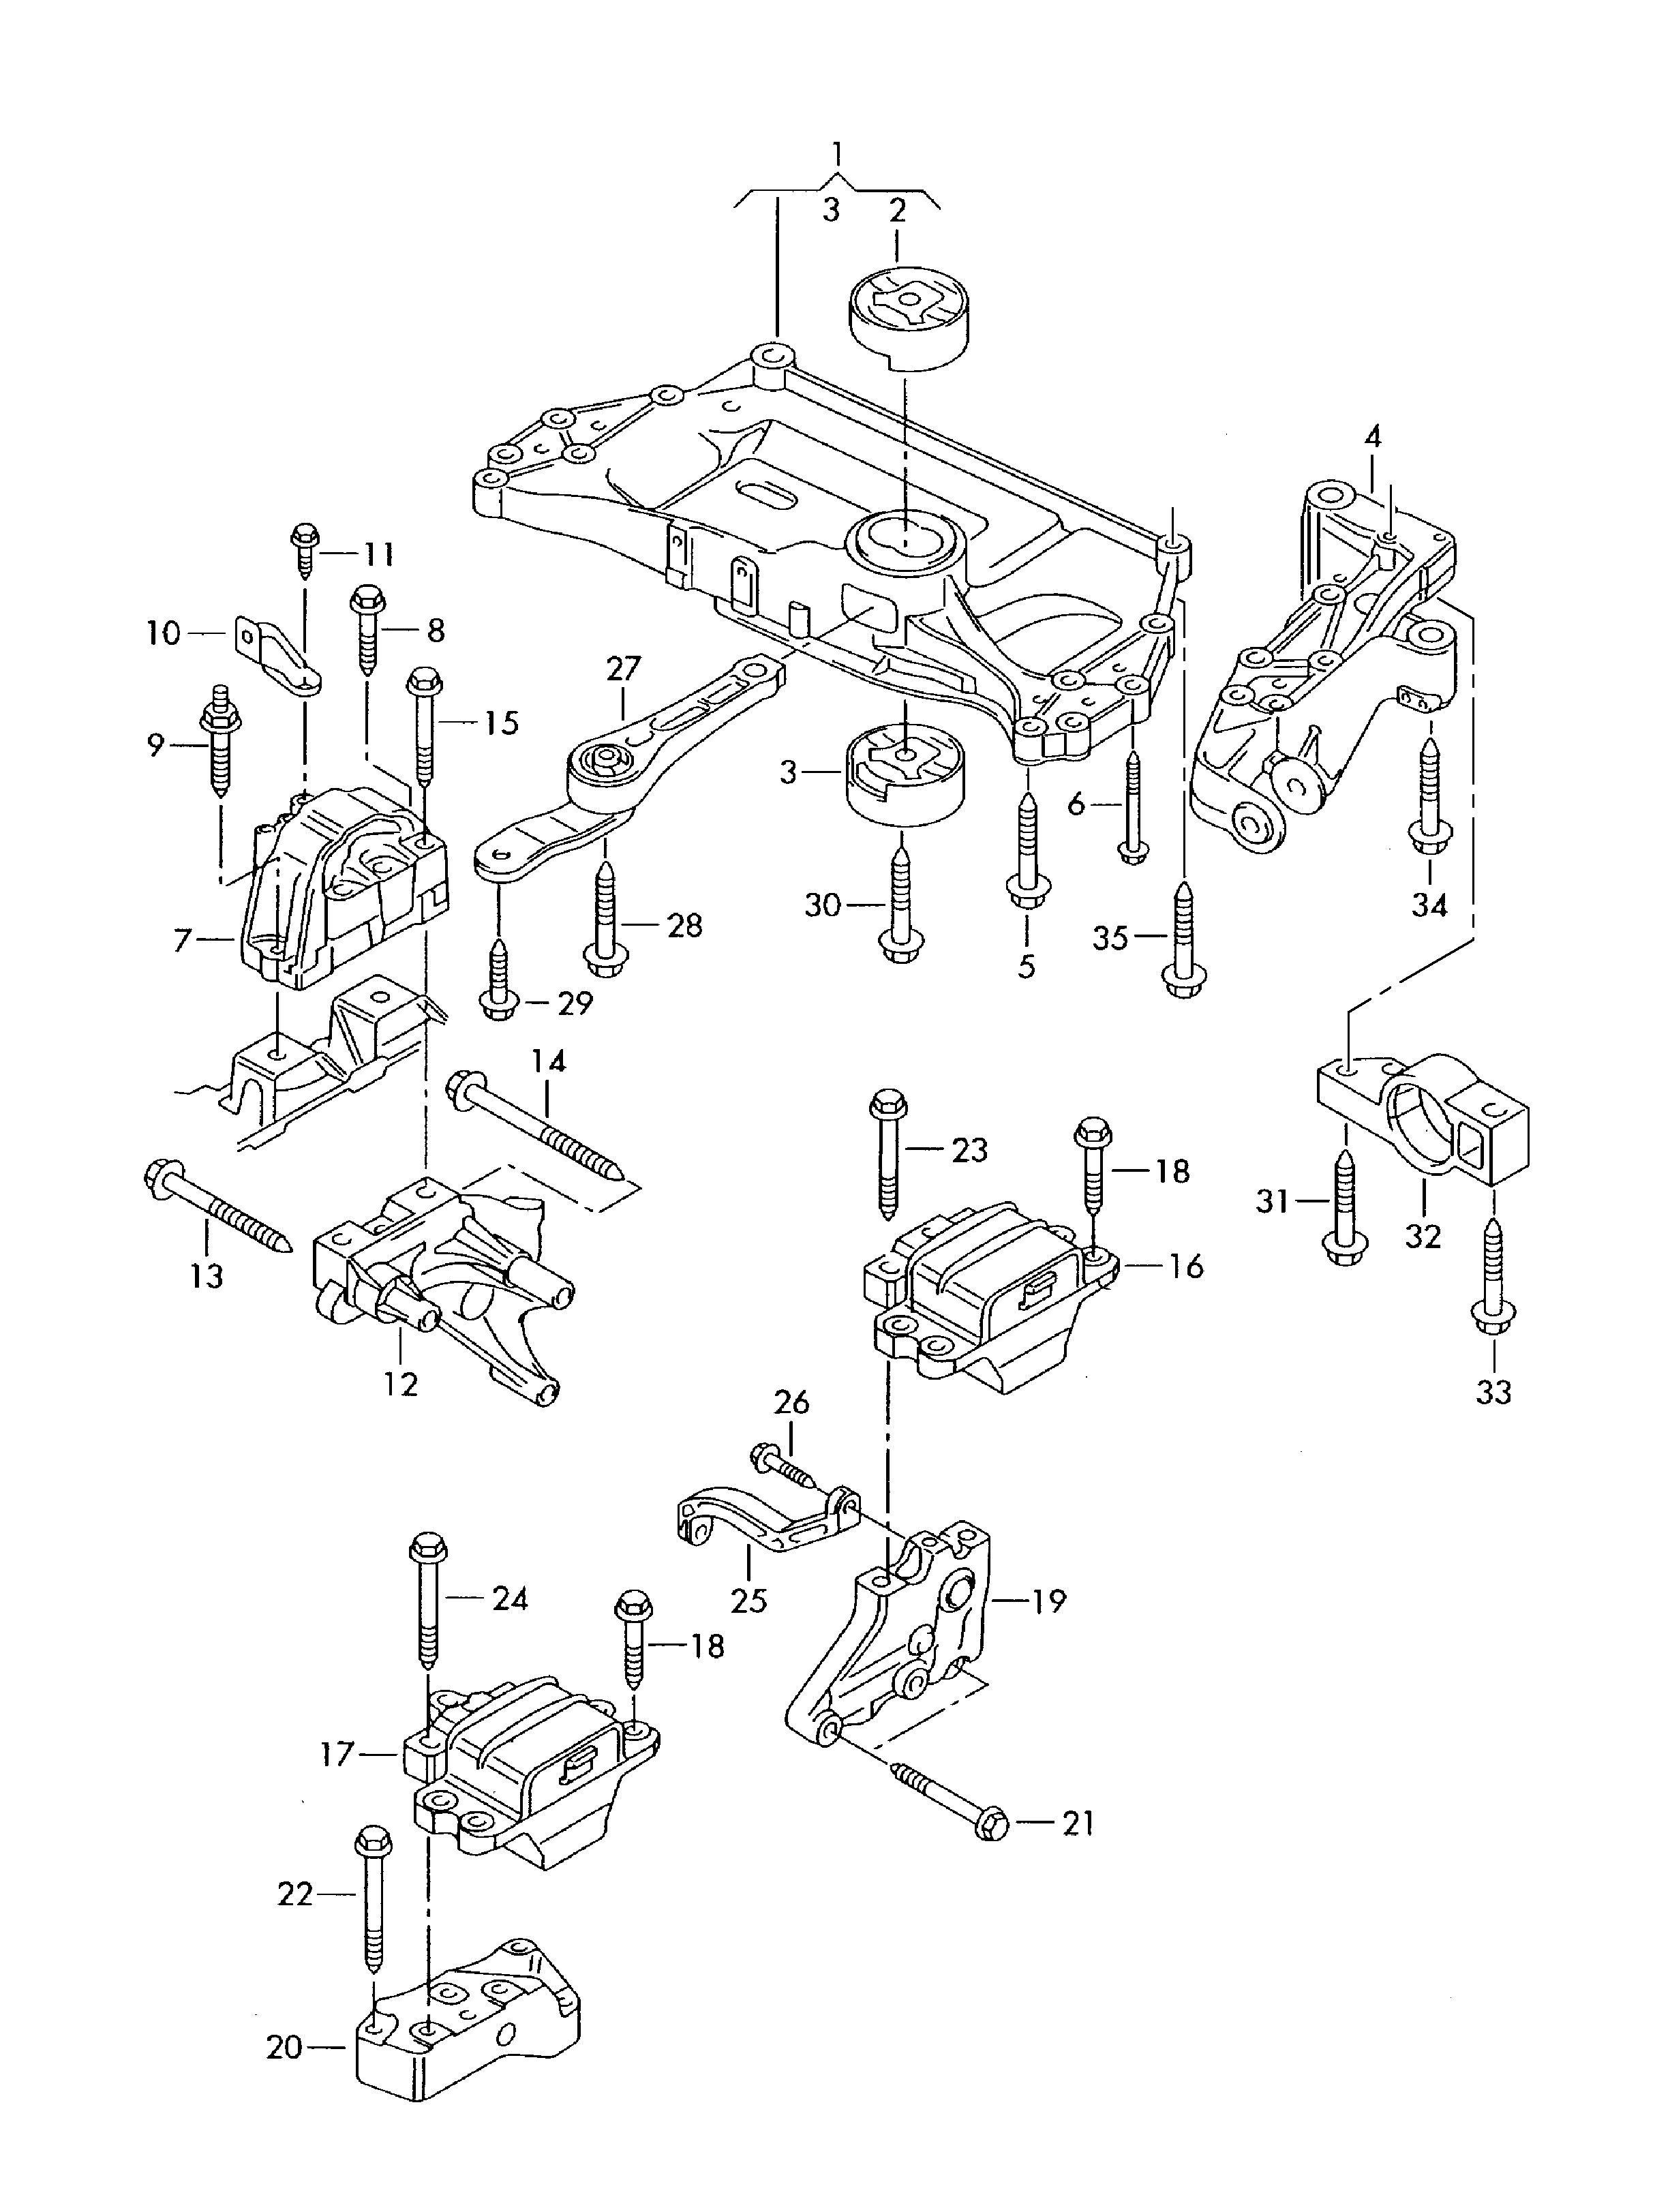 mounting parts for engine and
transmission - Golf/Variant/4Motion(GOLF)  